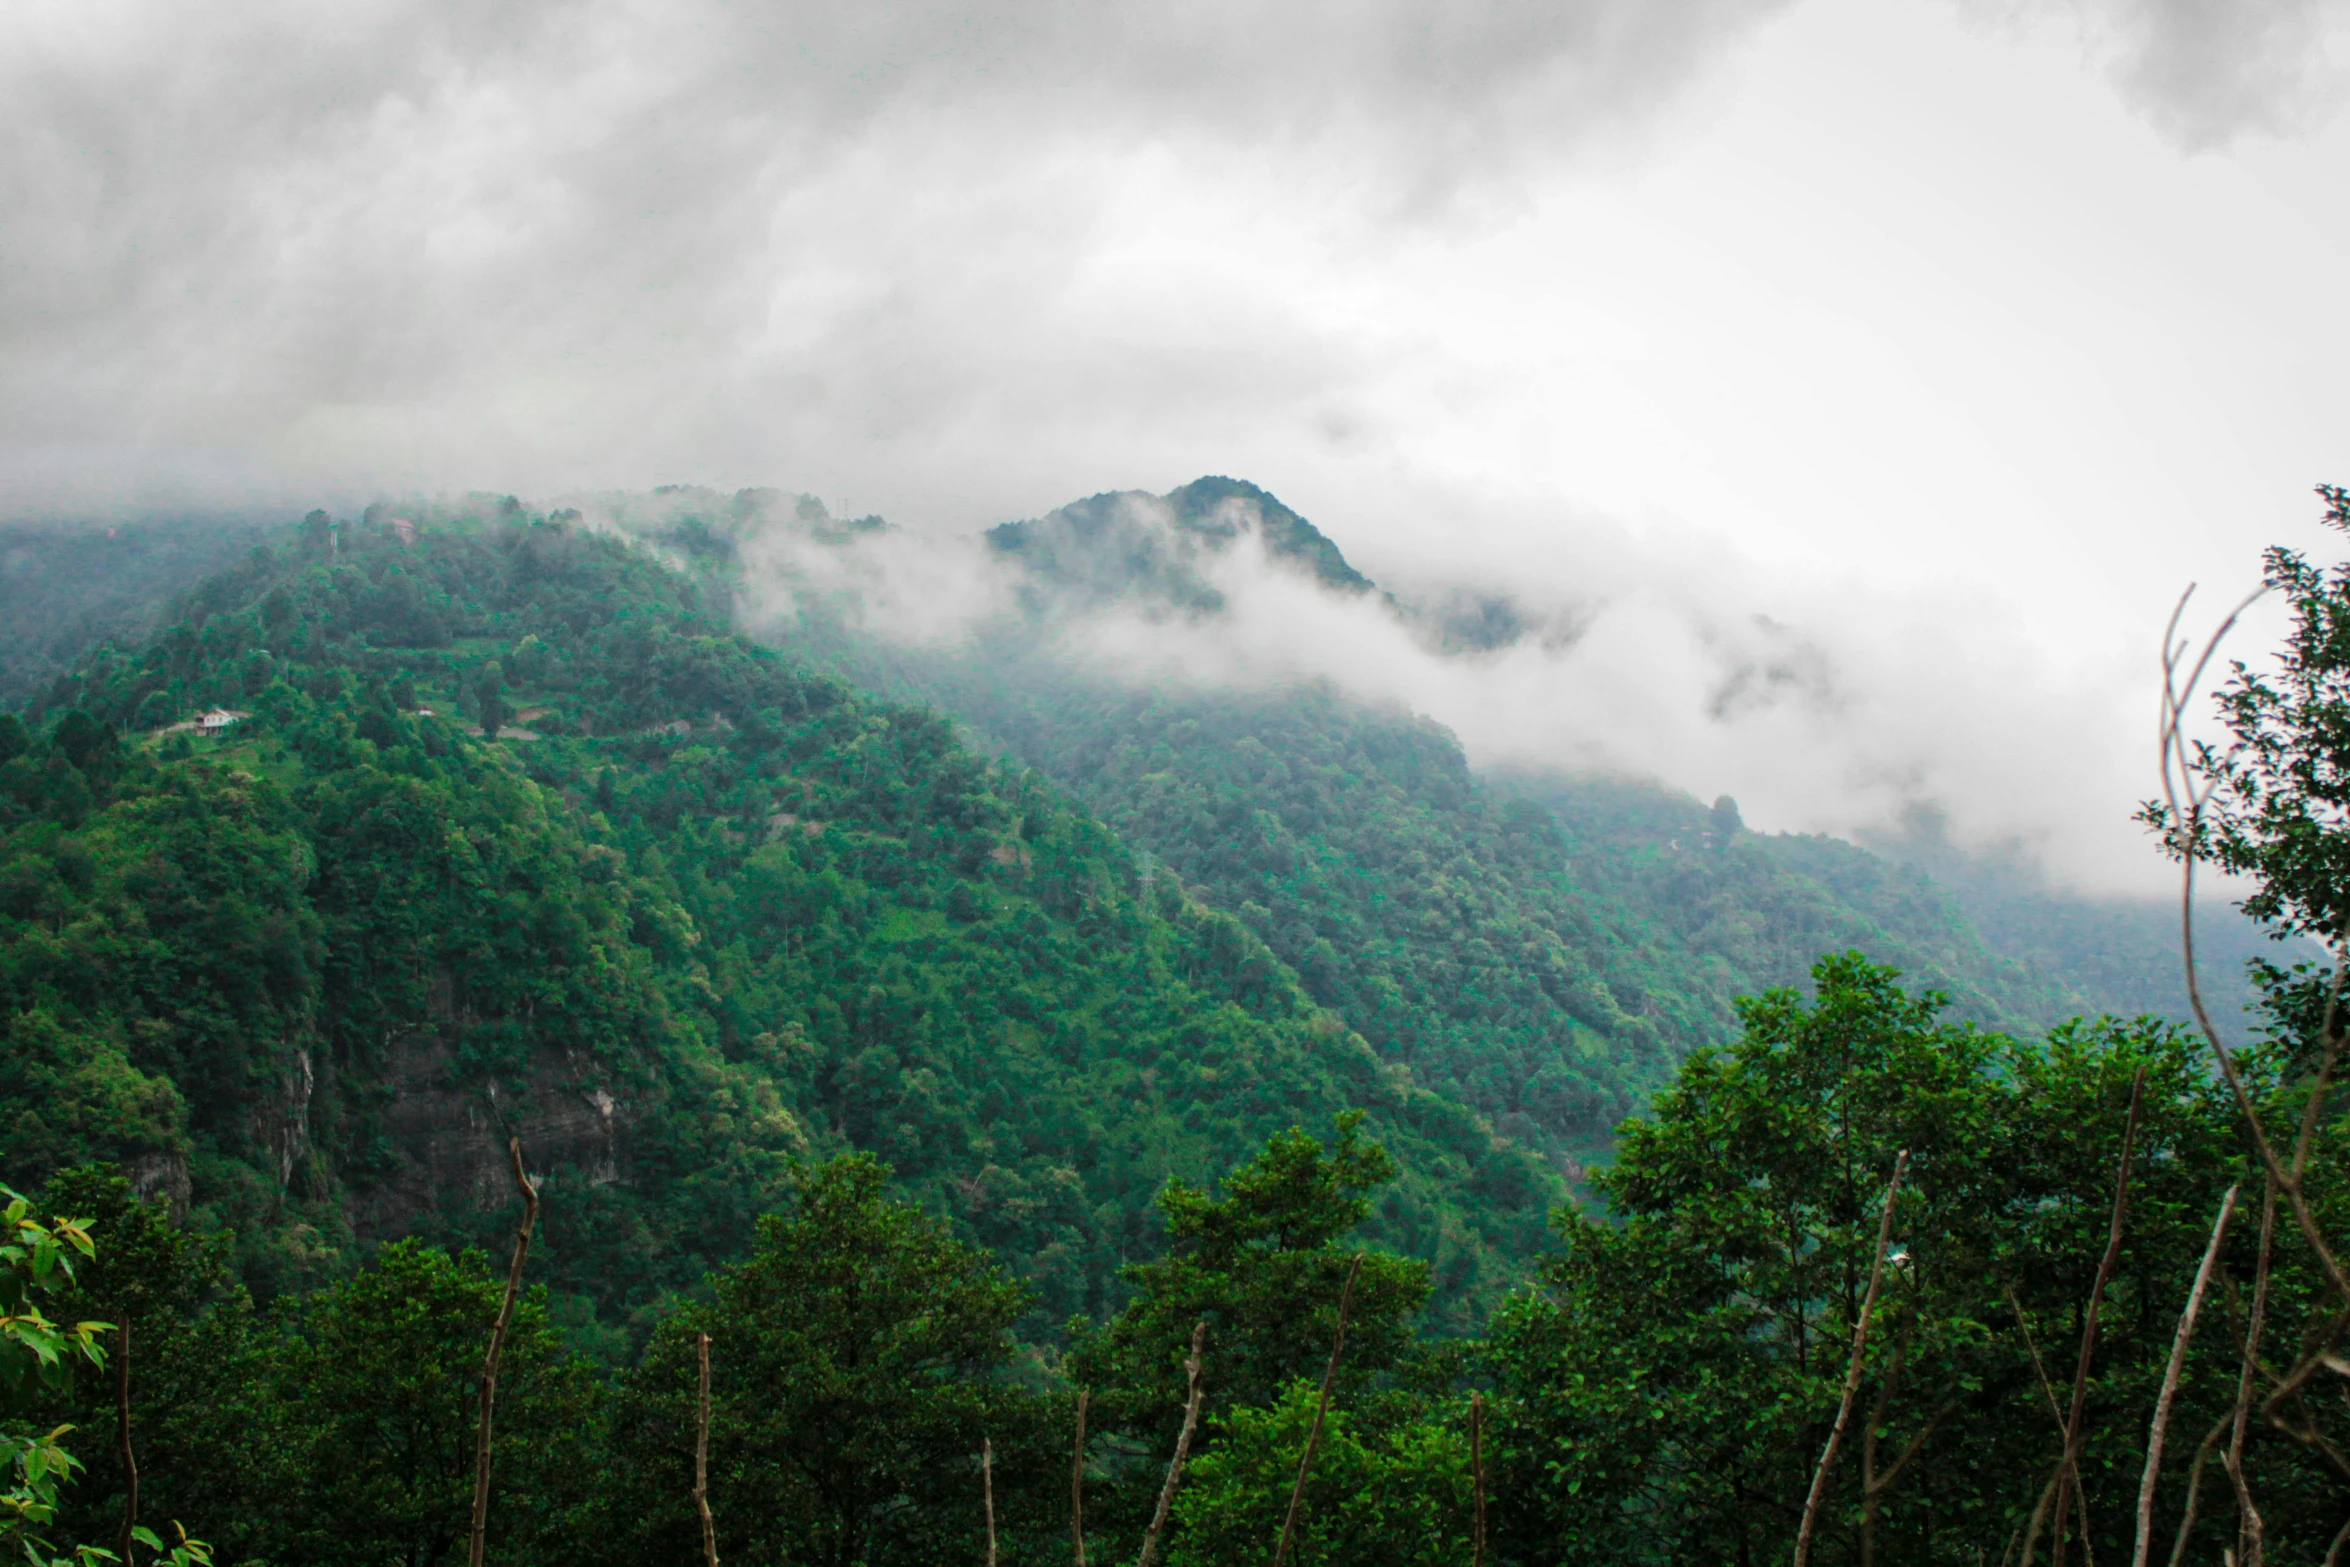 a mountain covered in low lying clouds with trees in the foreground